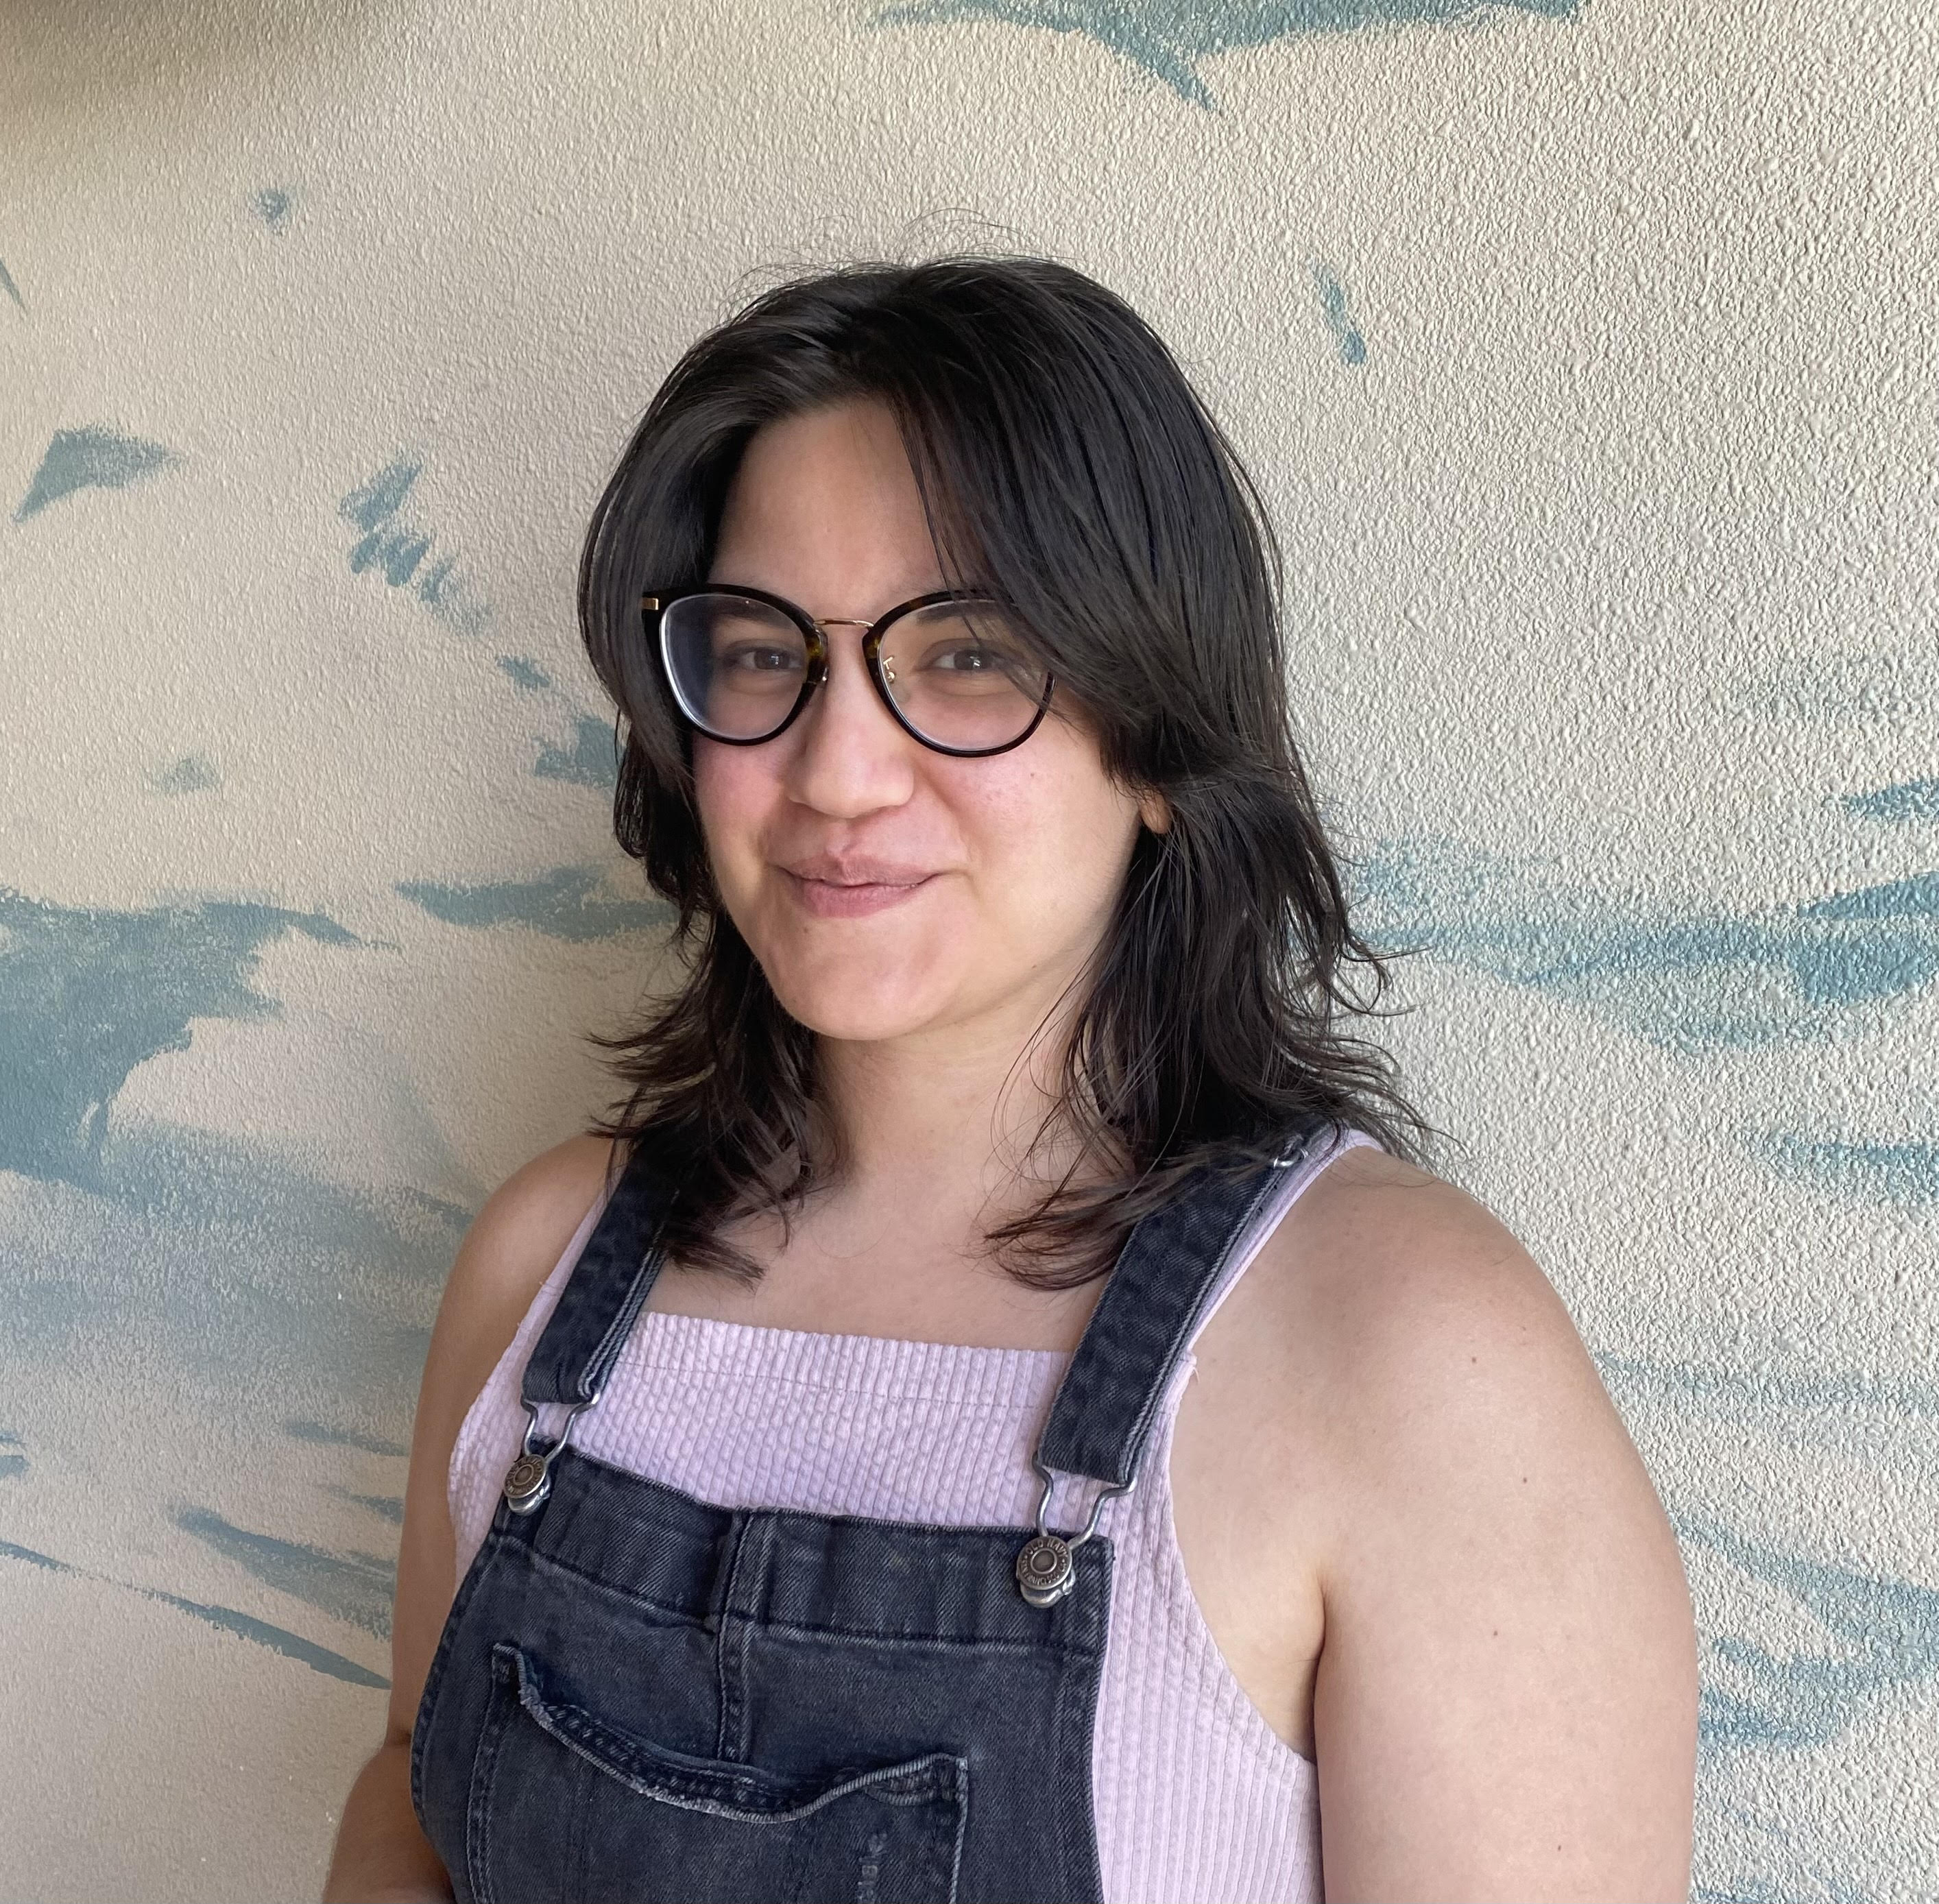 A portrait photo of Street Roots staff member Domenica Gavin. Domenica has half-long dark brown hair, loosely styled. She is wearing black-rimmed glasses and is looking into the camera at an angle. She is wearing a pink top with a pair of overall jeans 